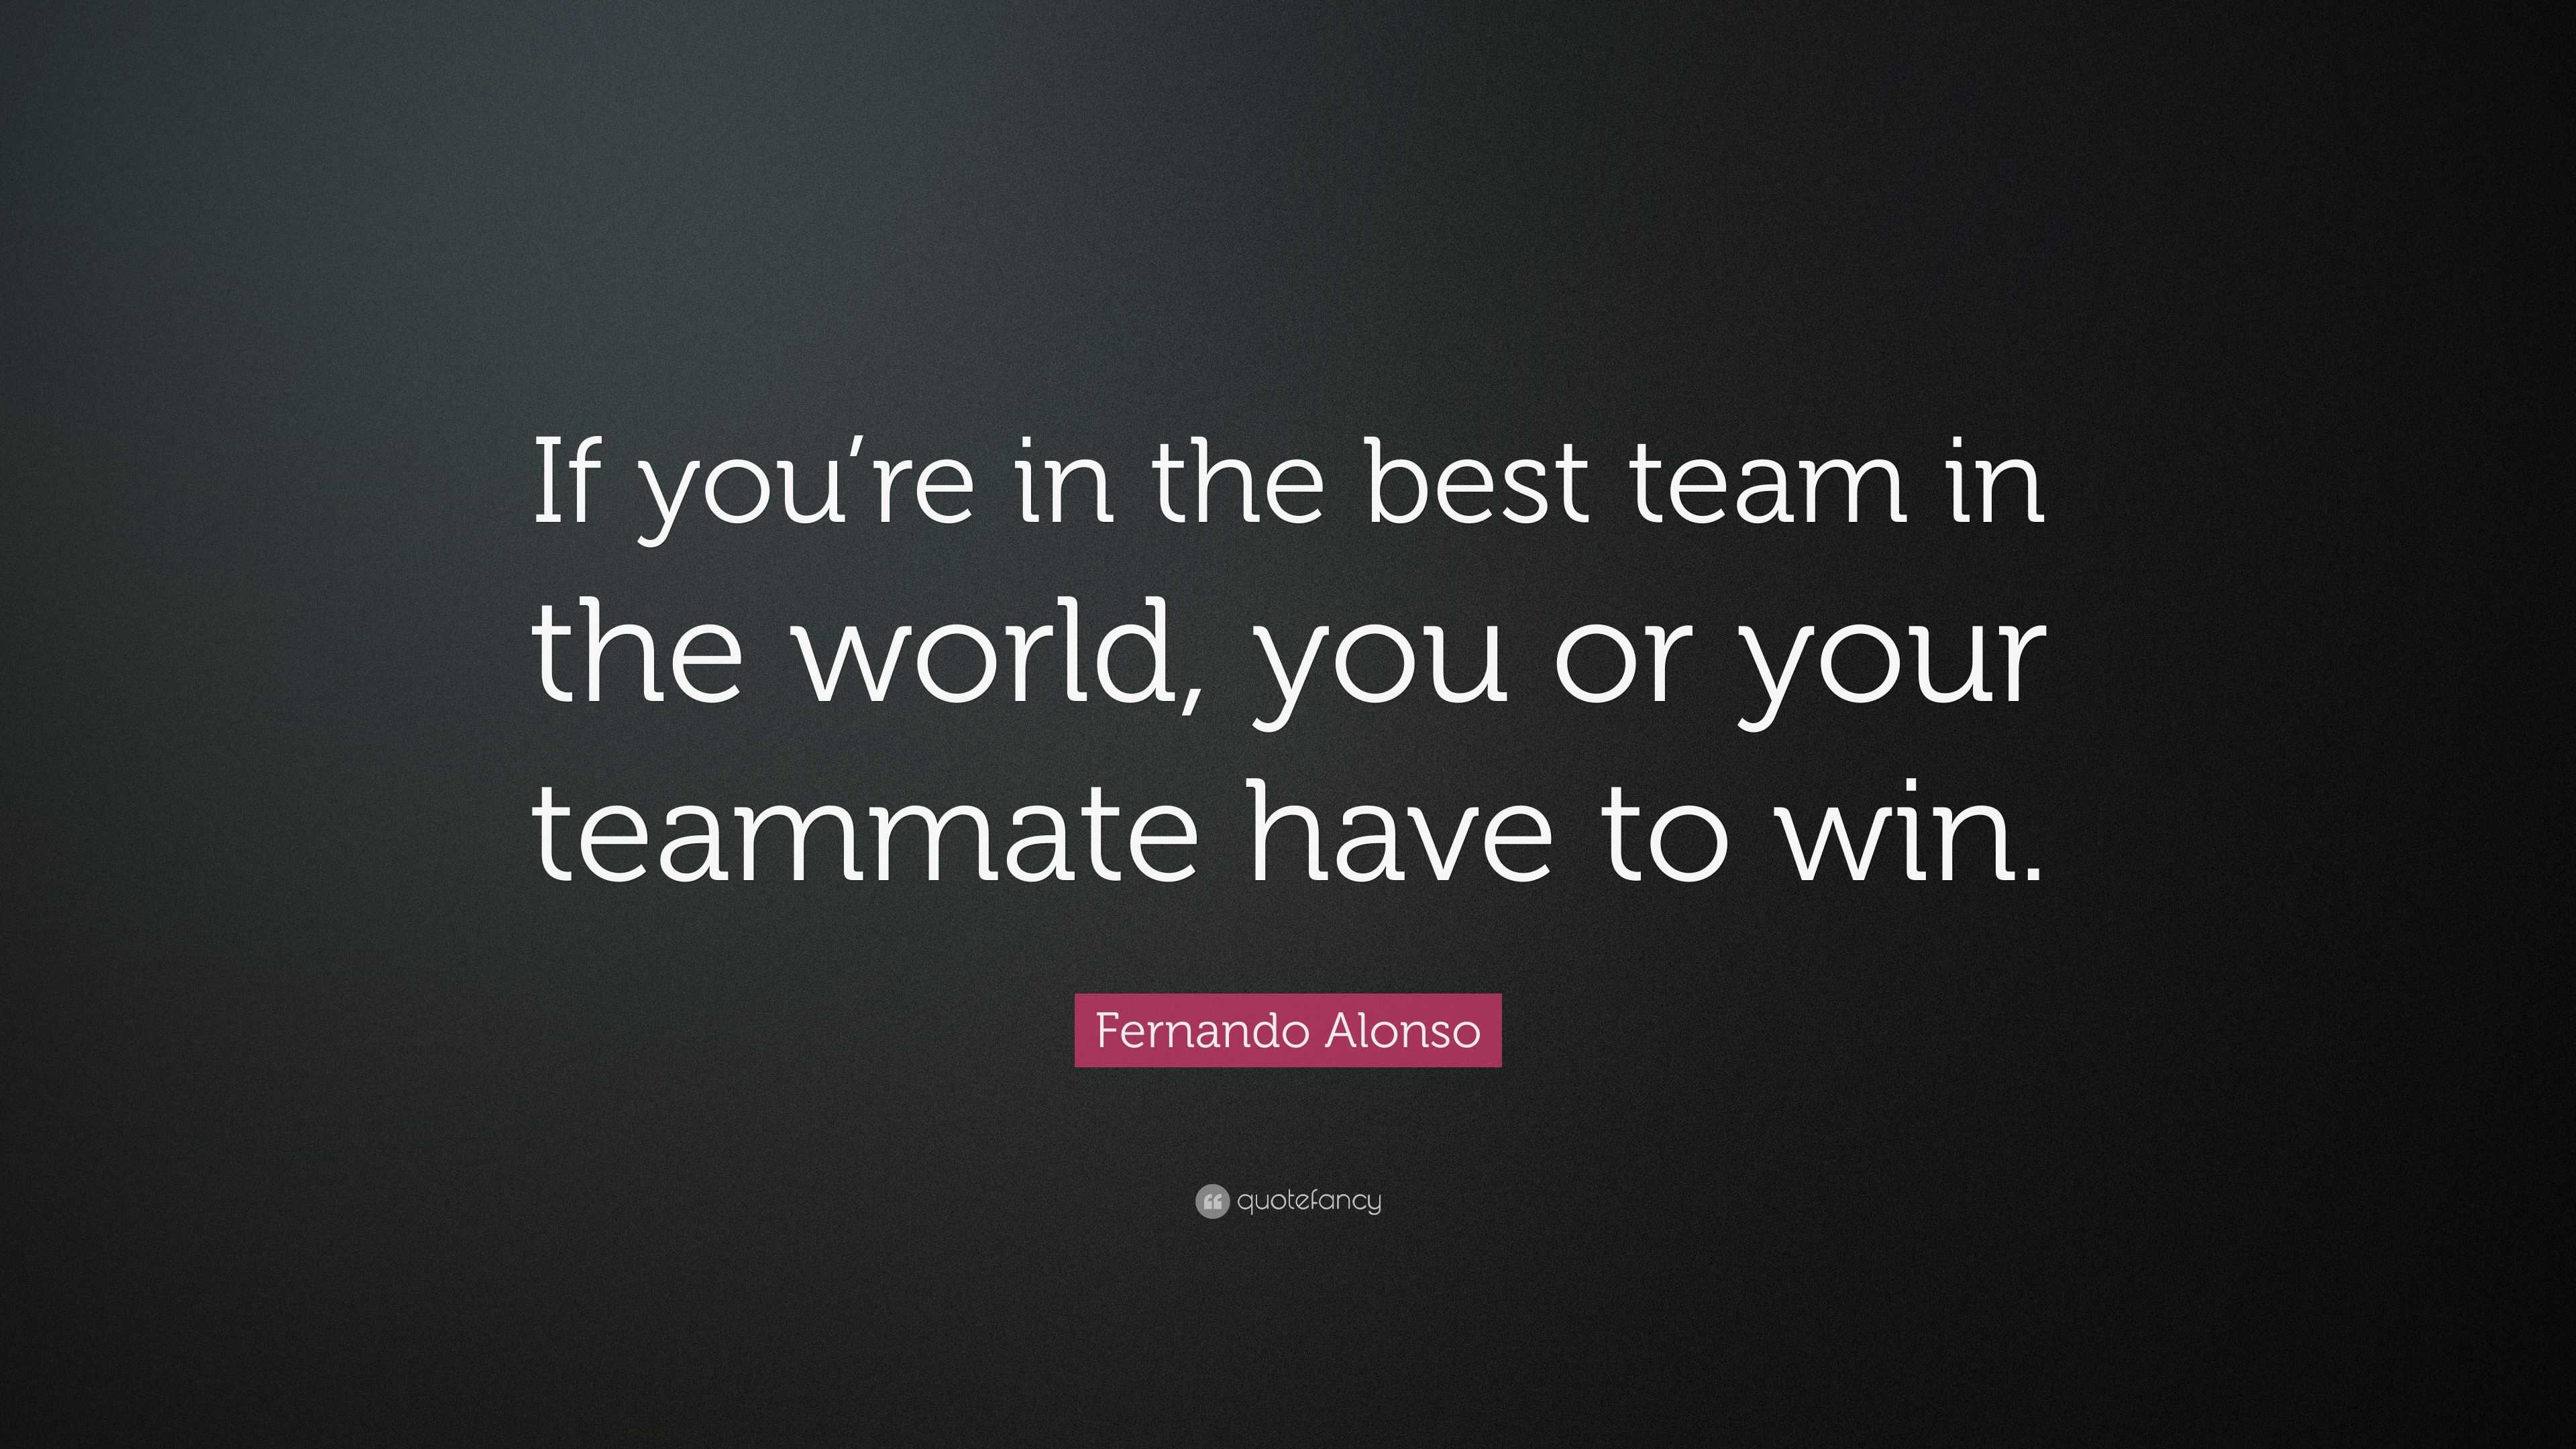 Fernando Alonso Quote: “If you’re in the best team in the world, you or ...